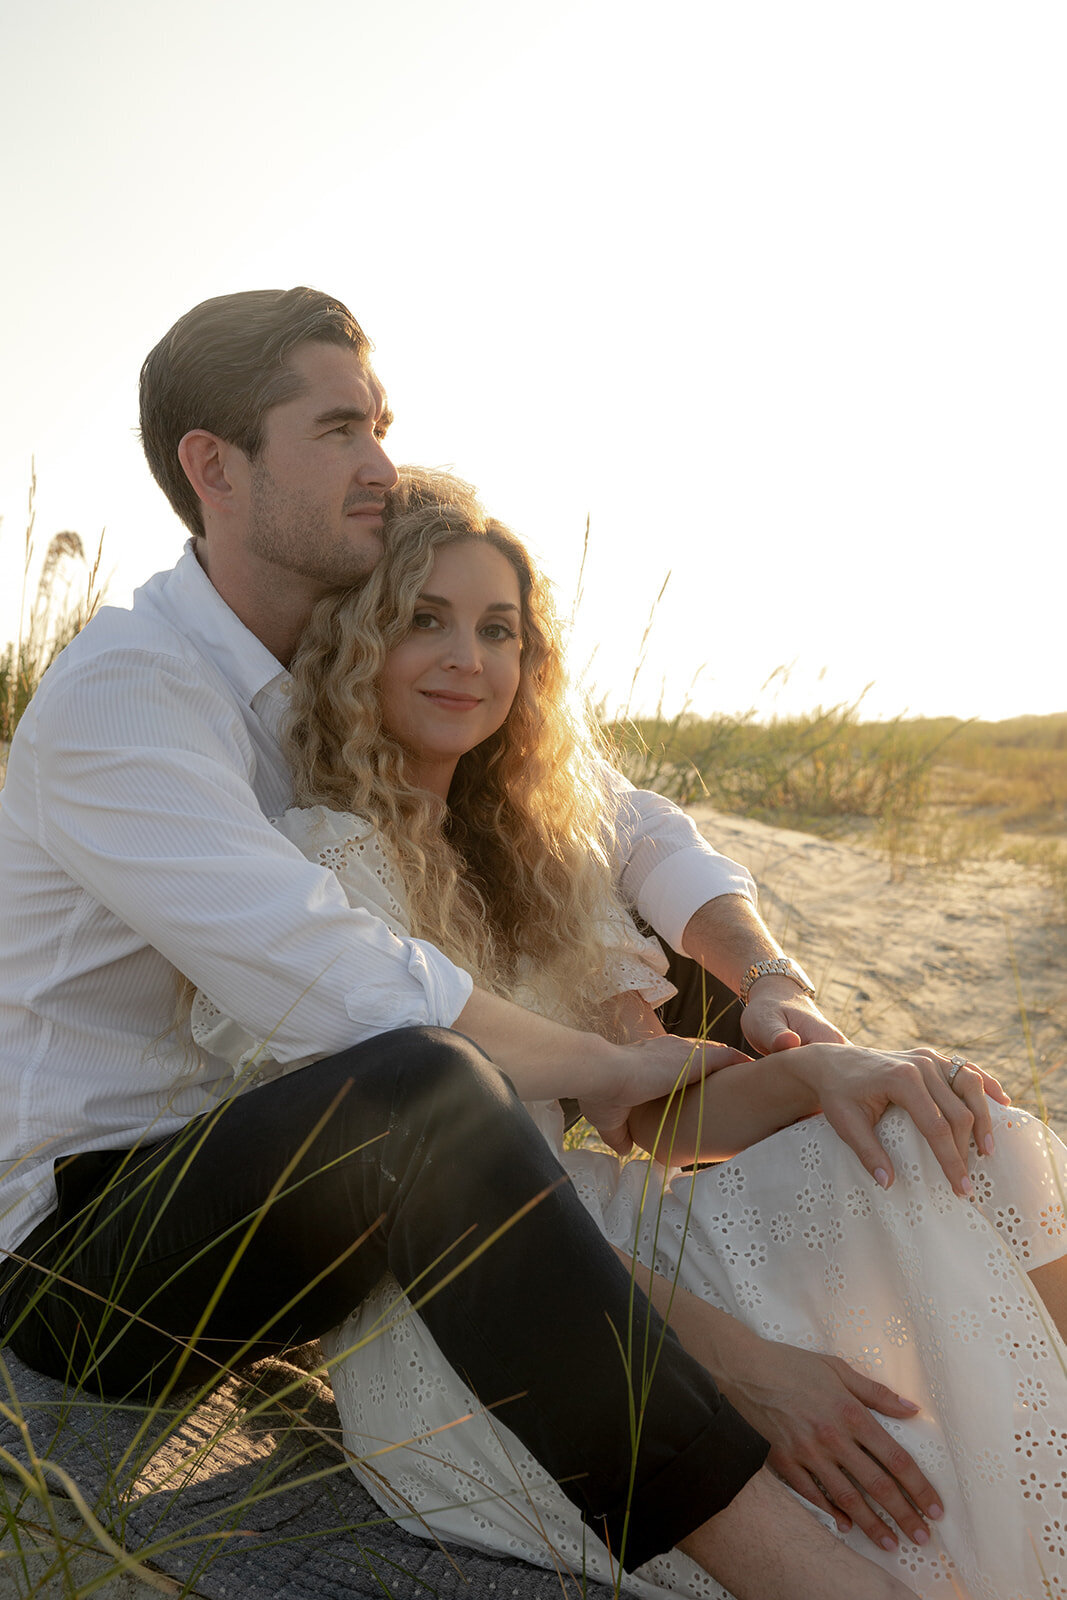 Couple sitting at Charleston beach. Woman  is leaning into man while sitting between his legs. She smiles into the camera. The man is looking straight . Both are surrounded by sand and grass.